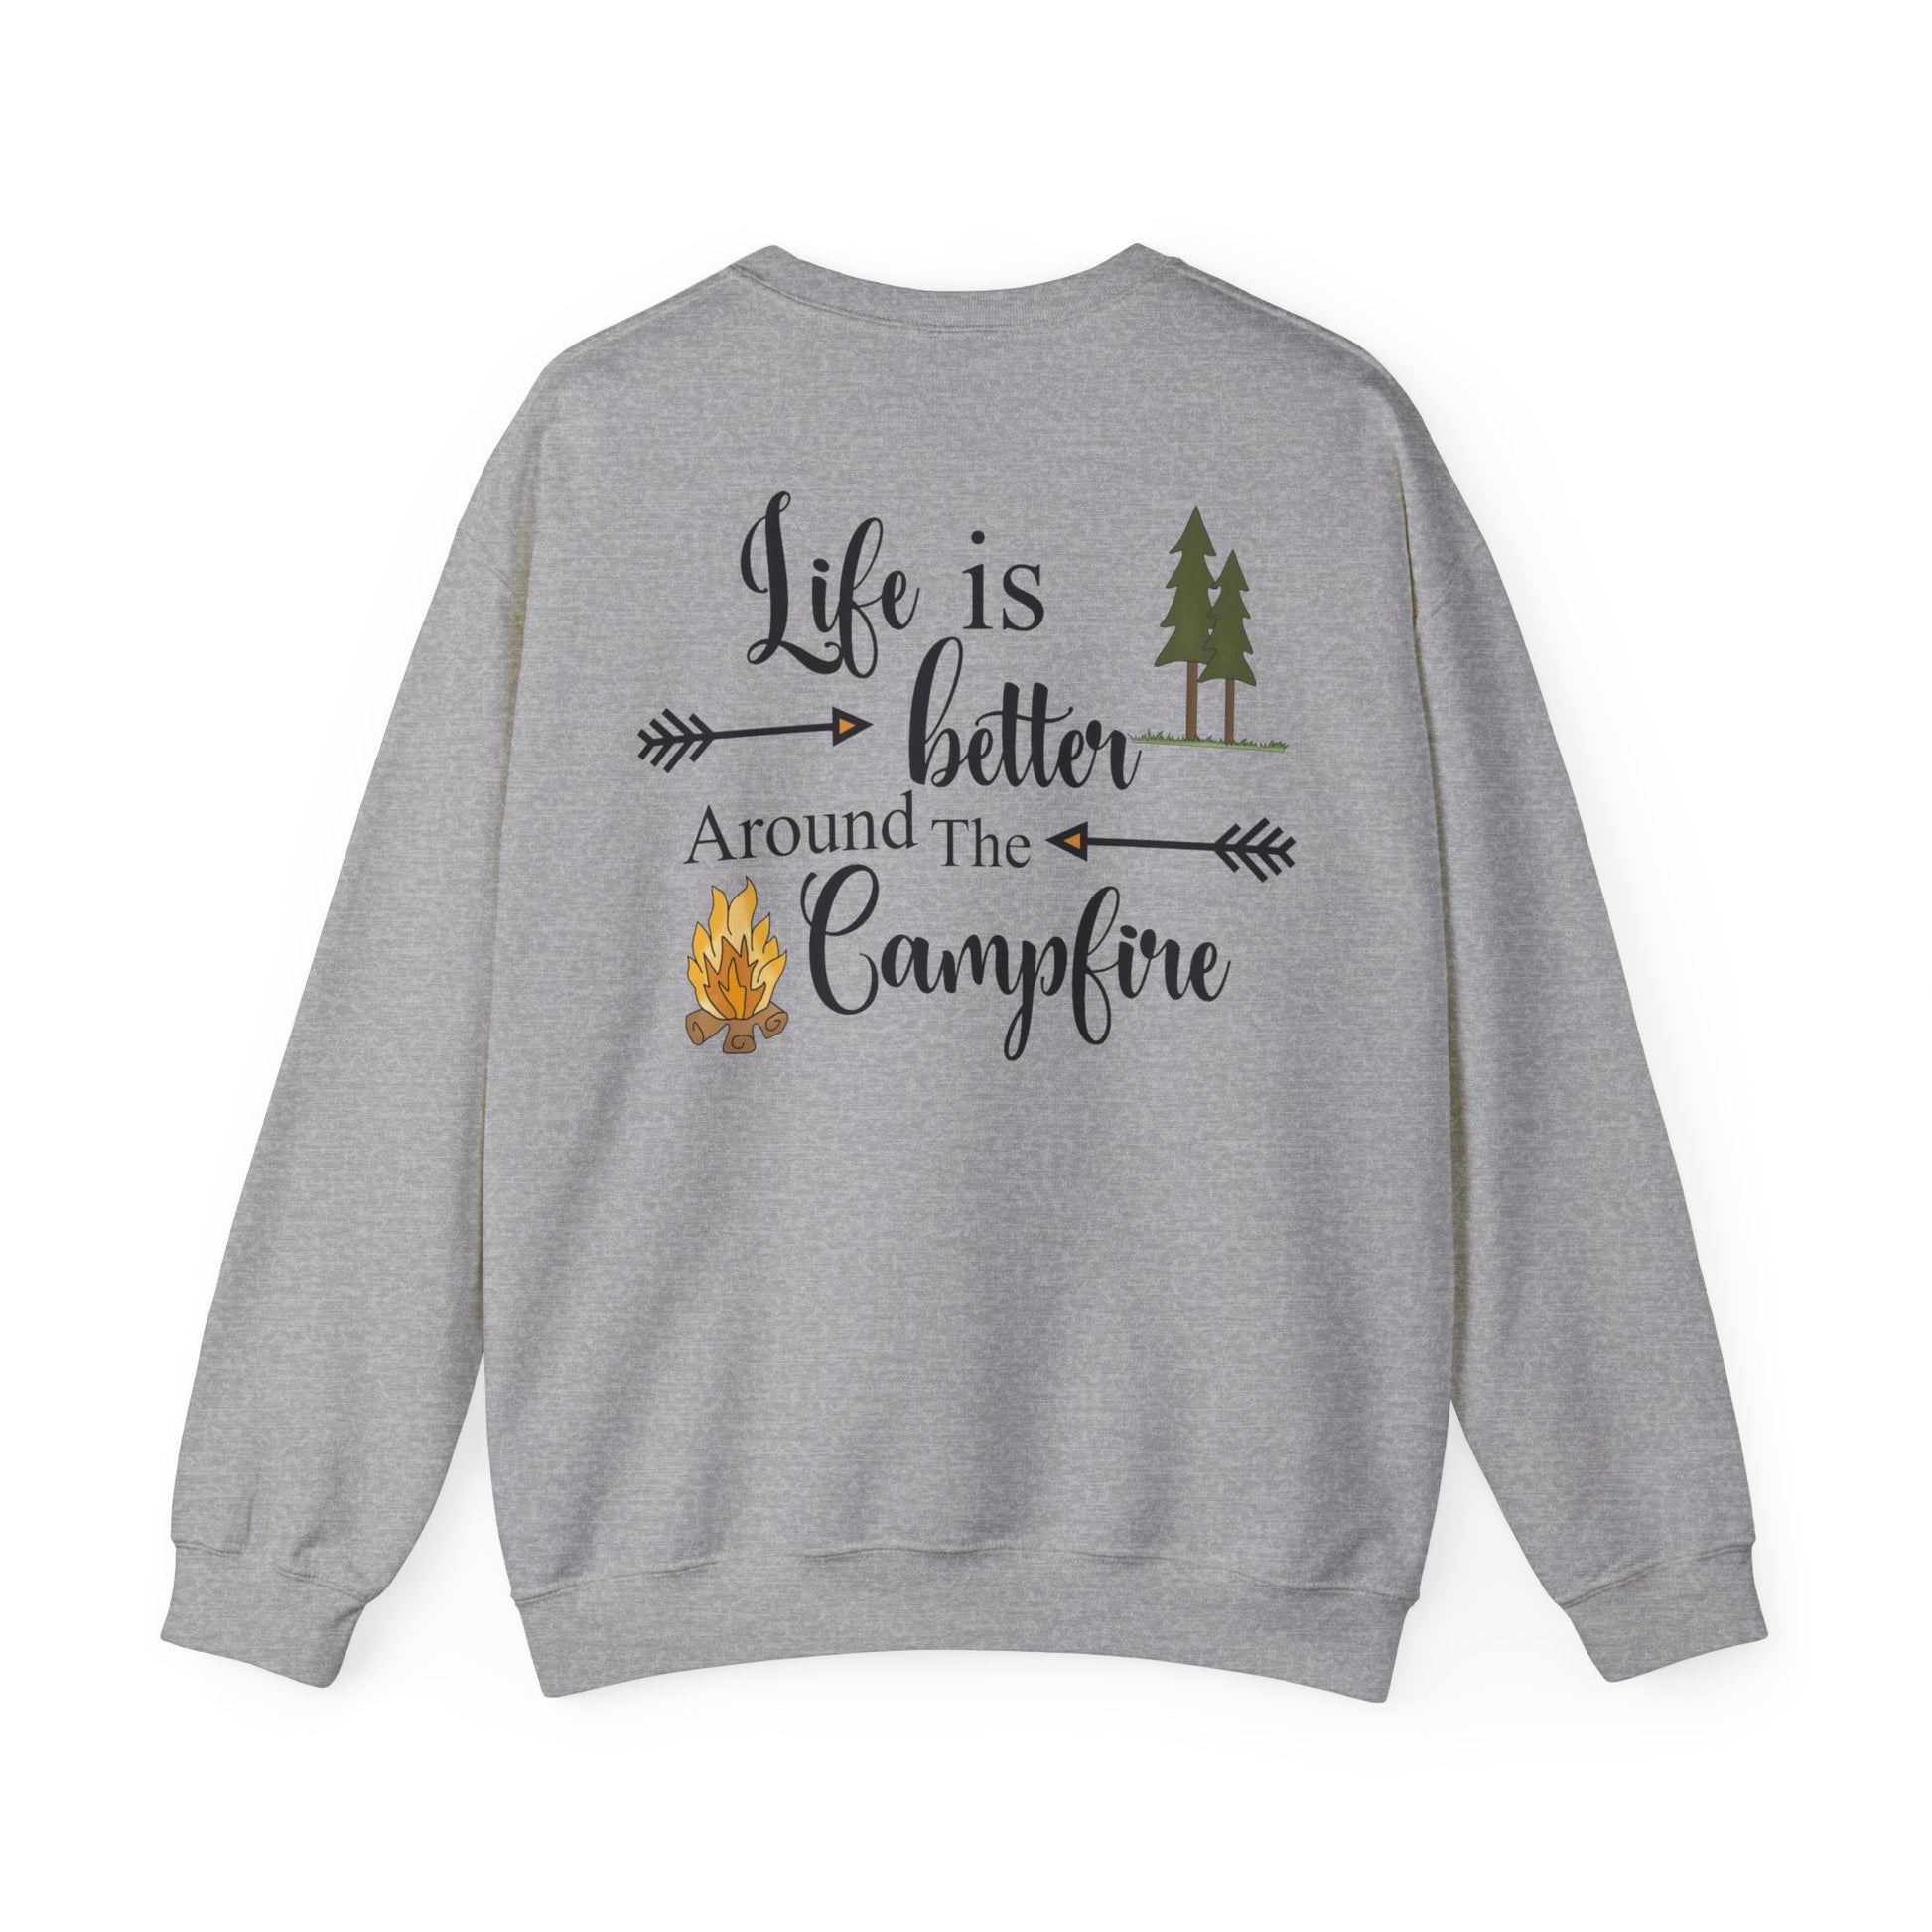 Experience the comforting warmth and camaraderie of a cozy campfire with our Life is Better Around the Campfire sweatshirt. Made with heavy blend fabric, it's perfect for cool evenings spent in the great outdoors. Get yours now and make every camping trip even more memorable!